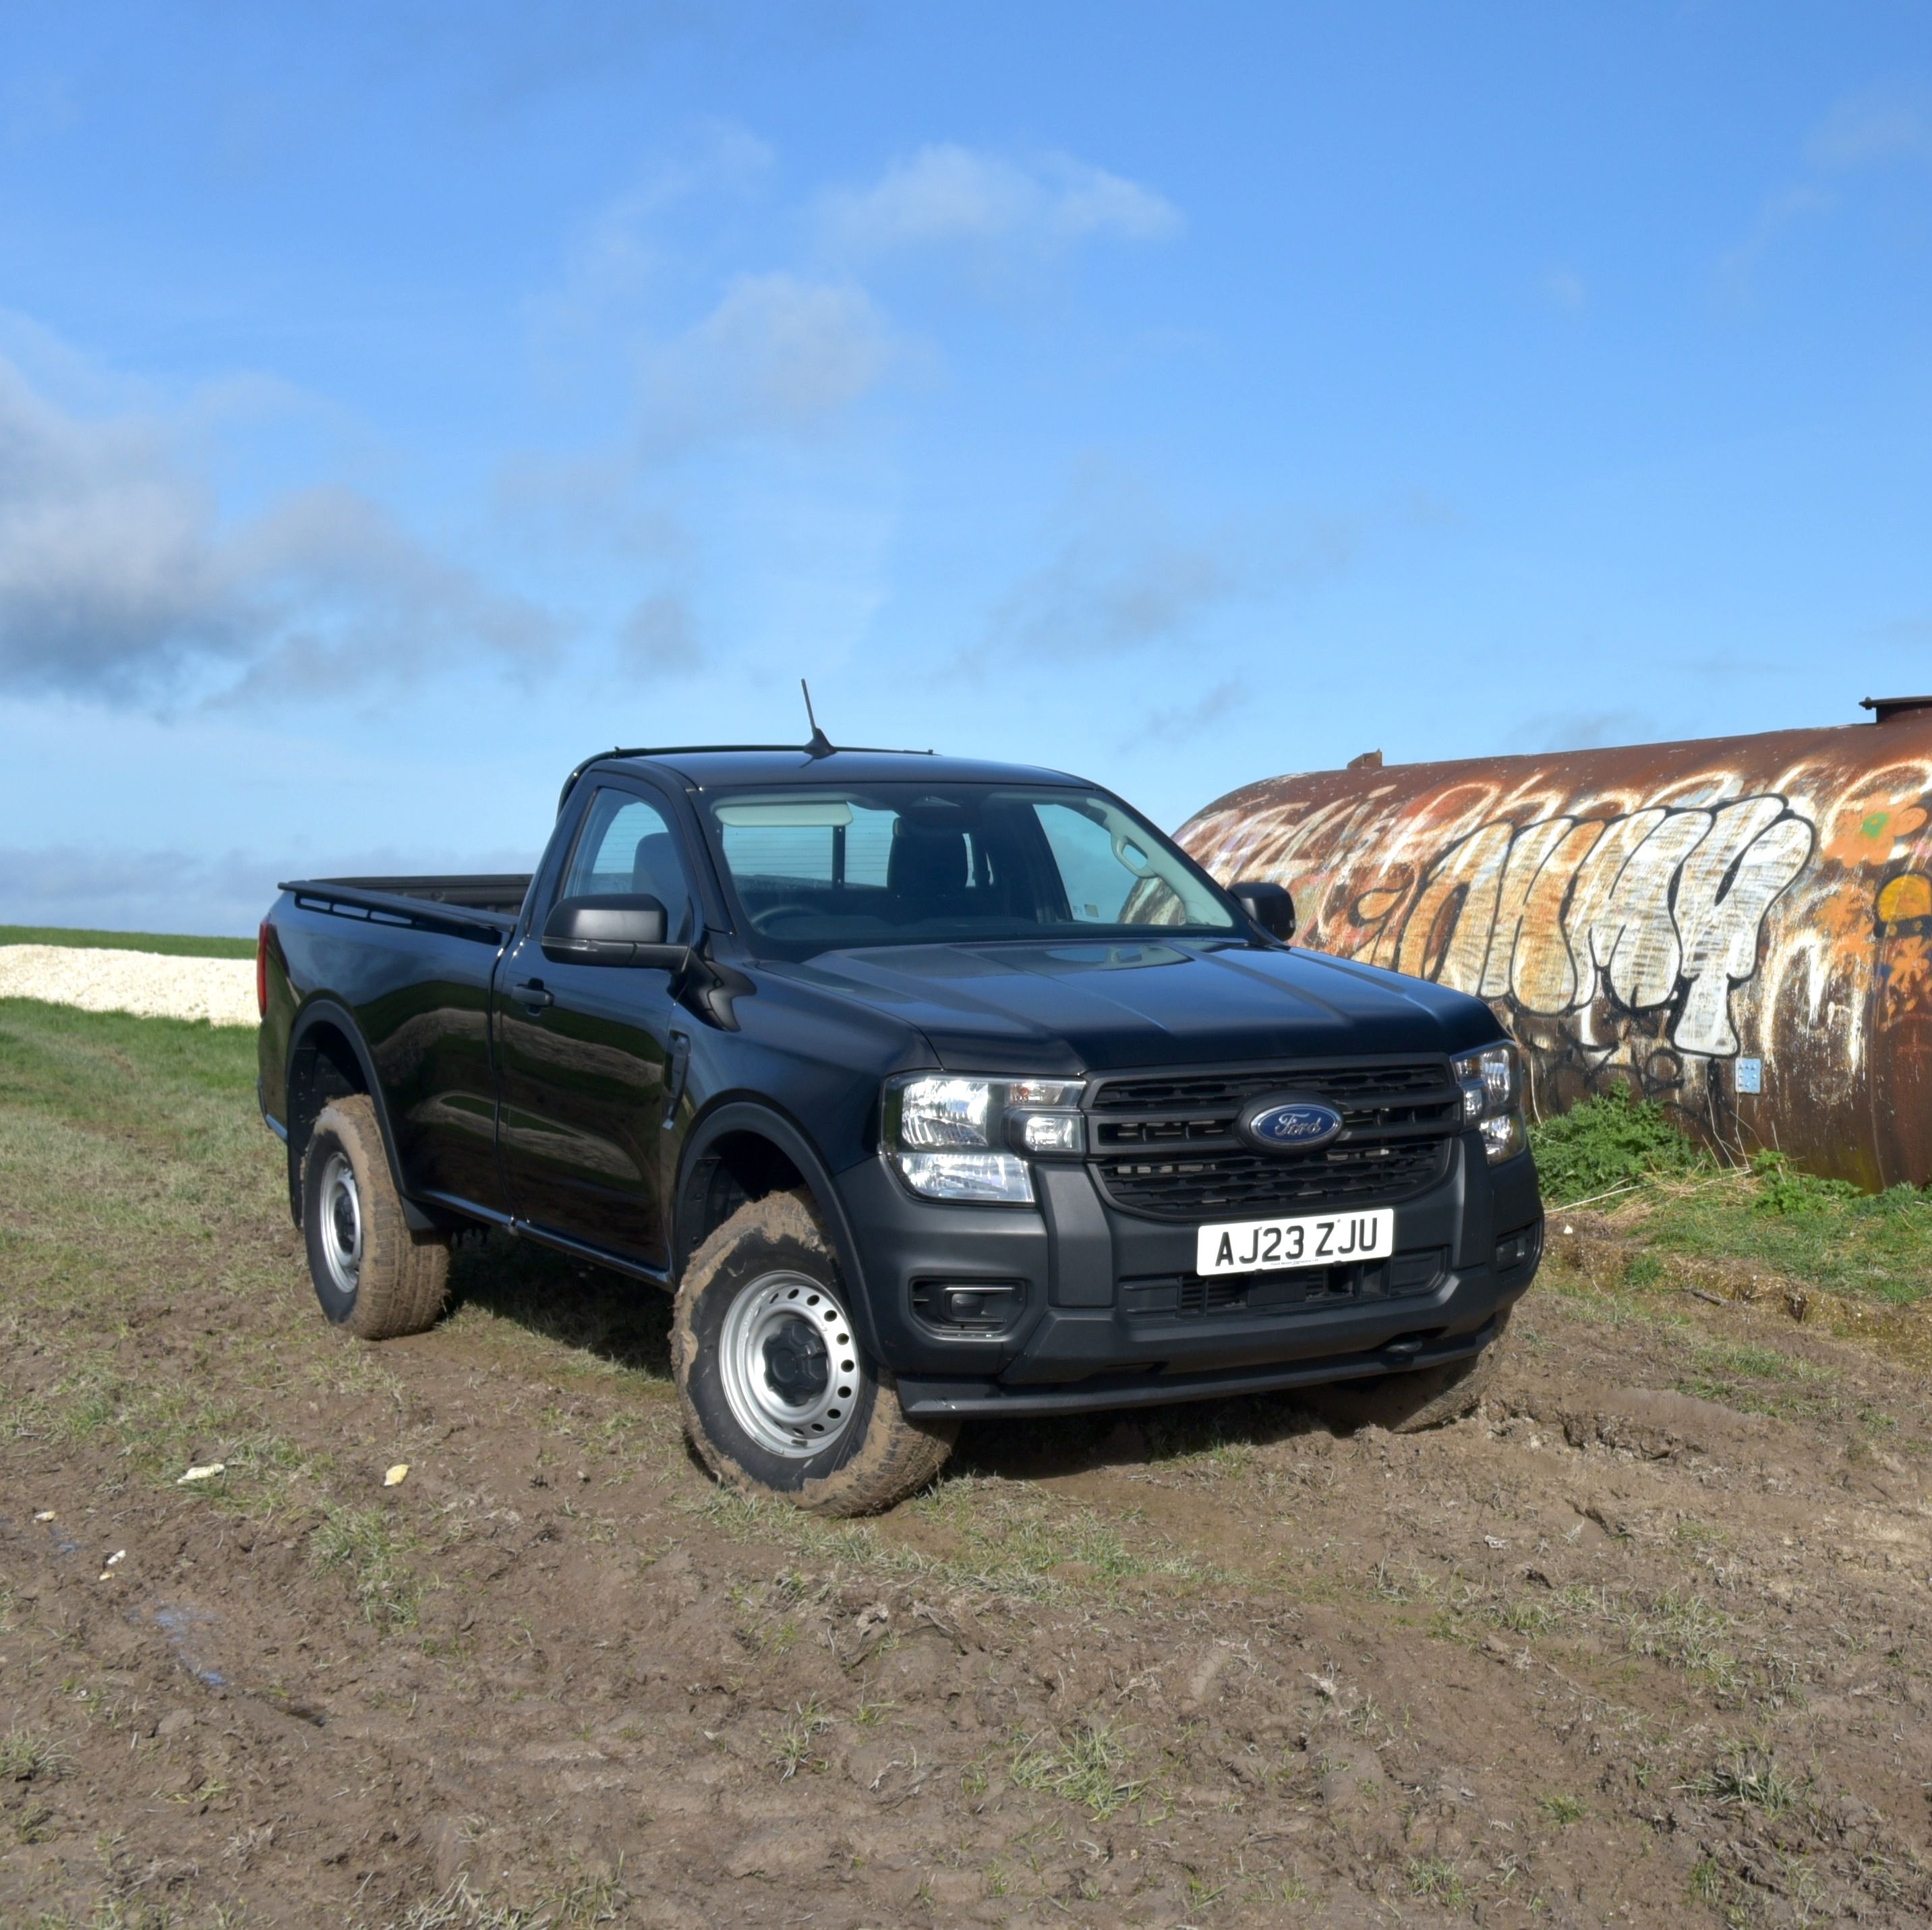 We Drove the Ultra-Base, Manual Ford Ranger the U.S. Doesn't Get. Should Americans Be Jealous?